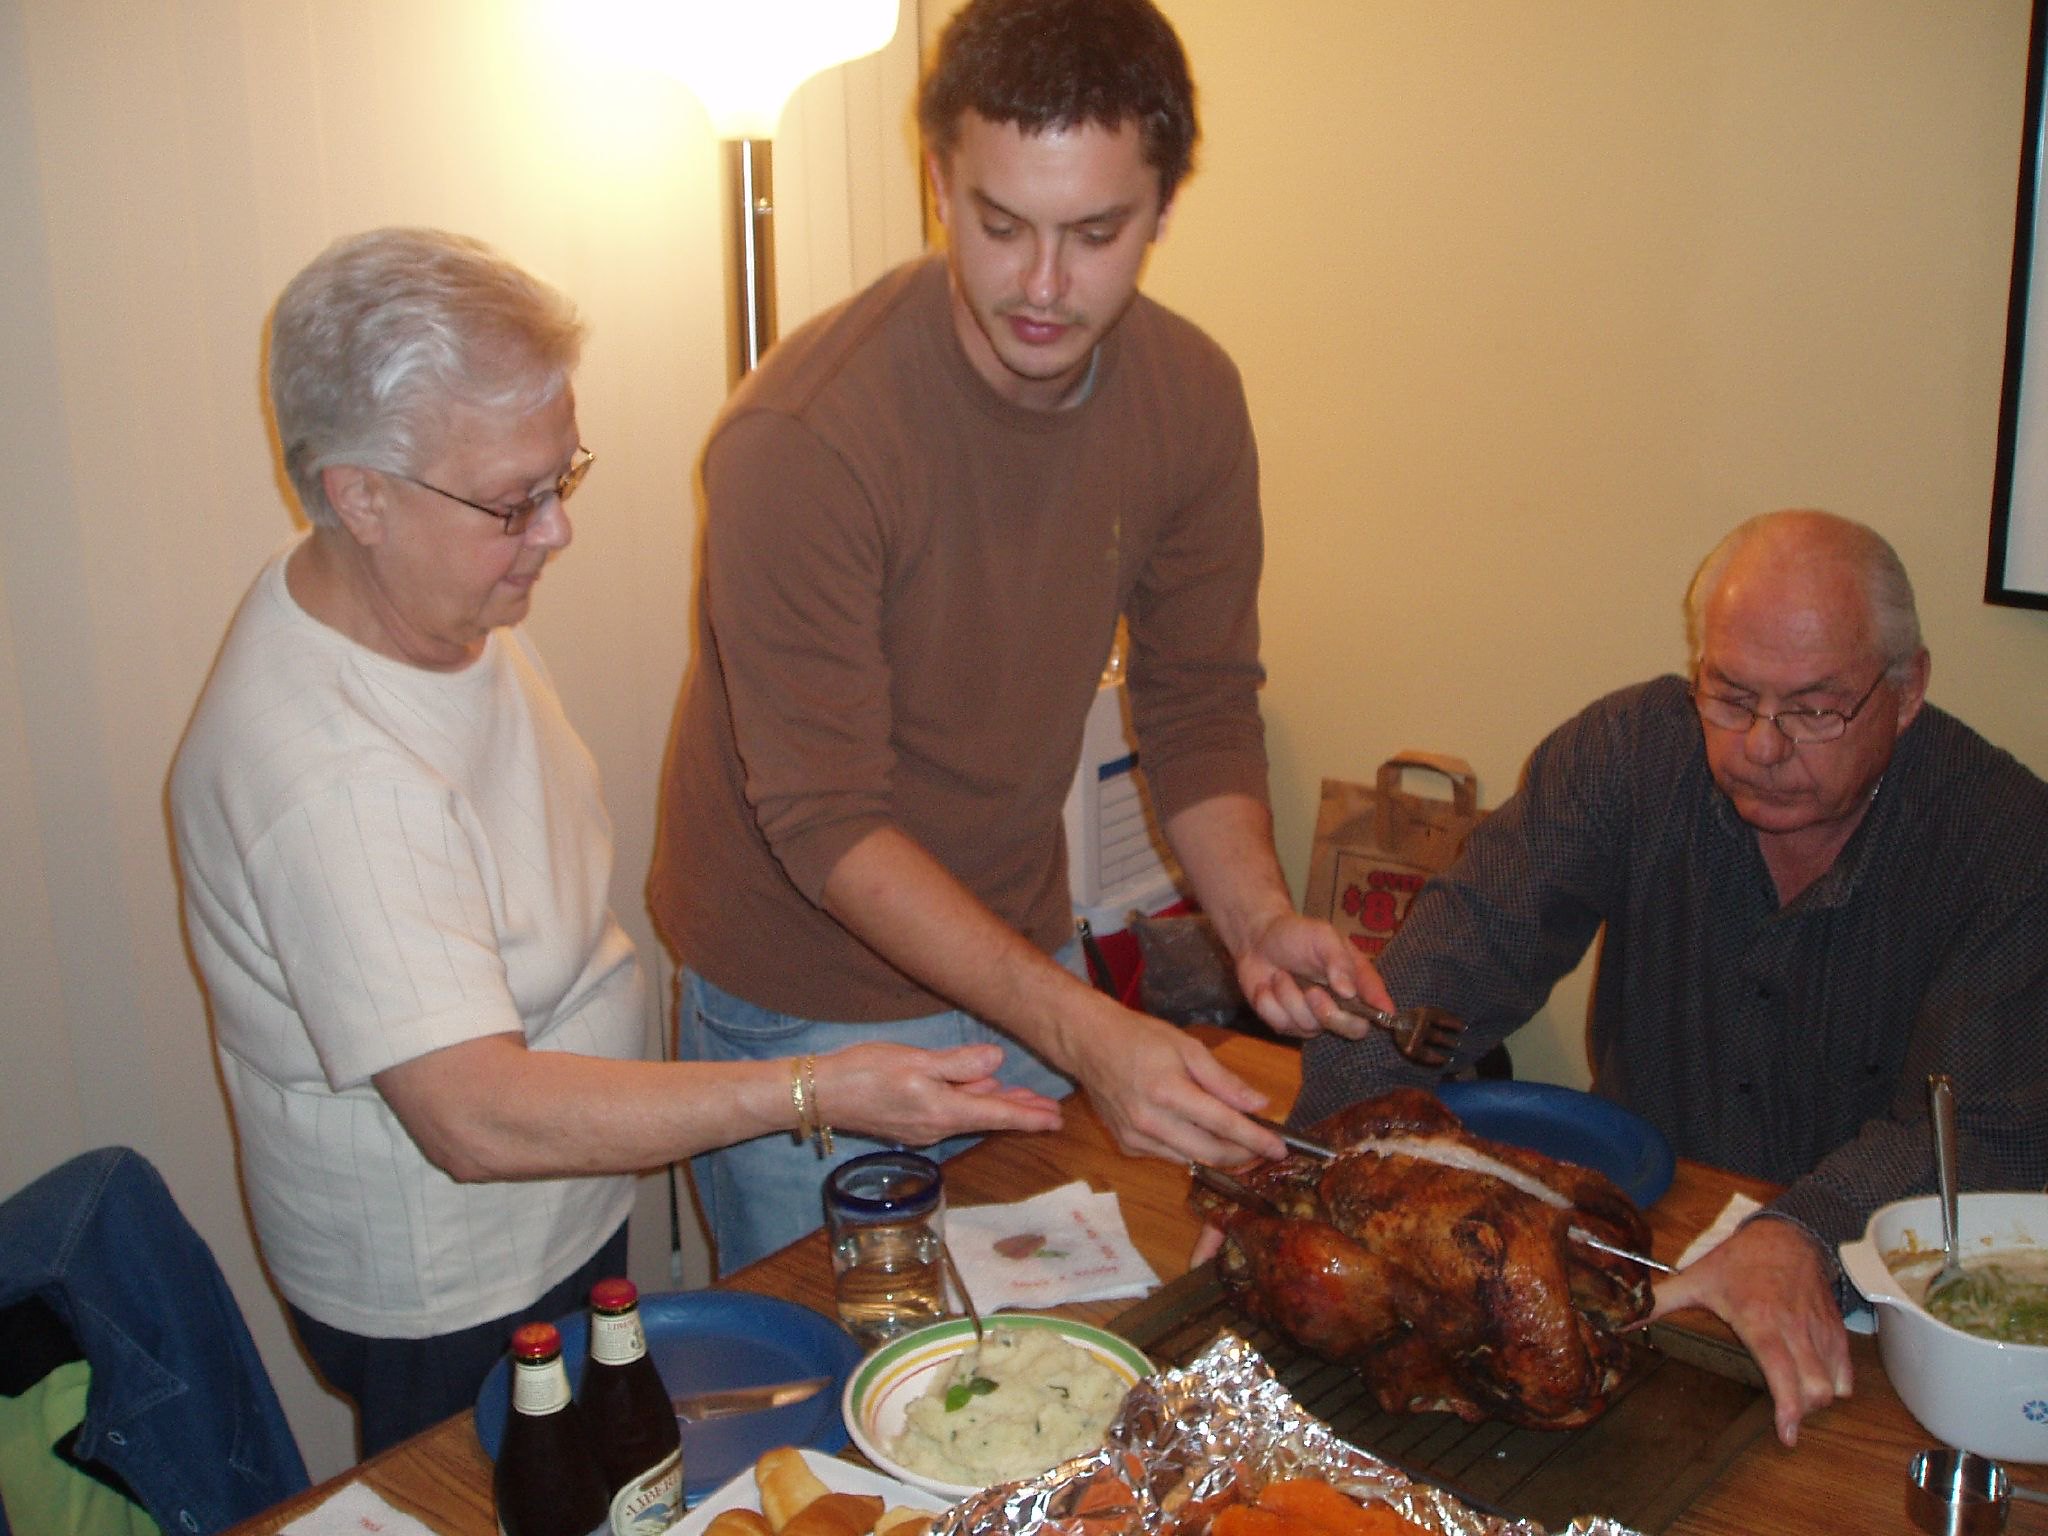 A family of three gathered for Thanksgiving dinner | Source: Flickr